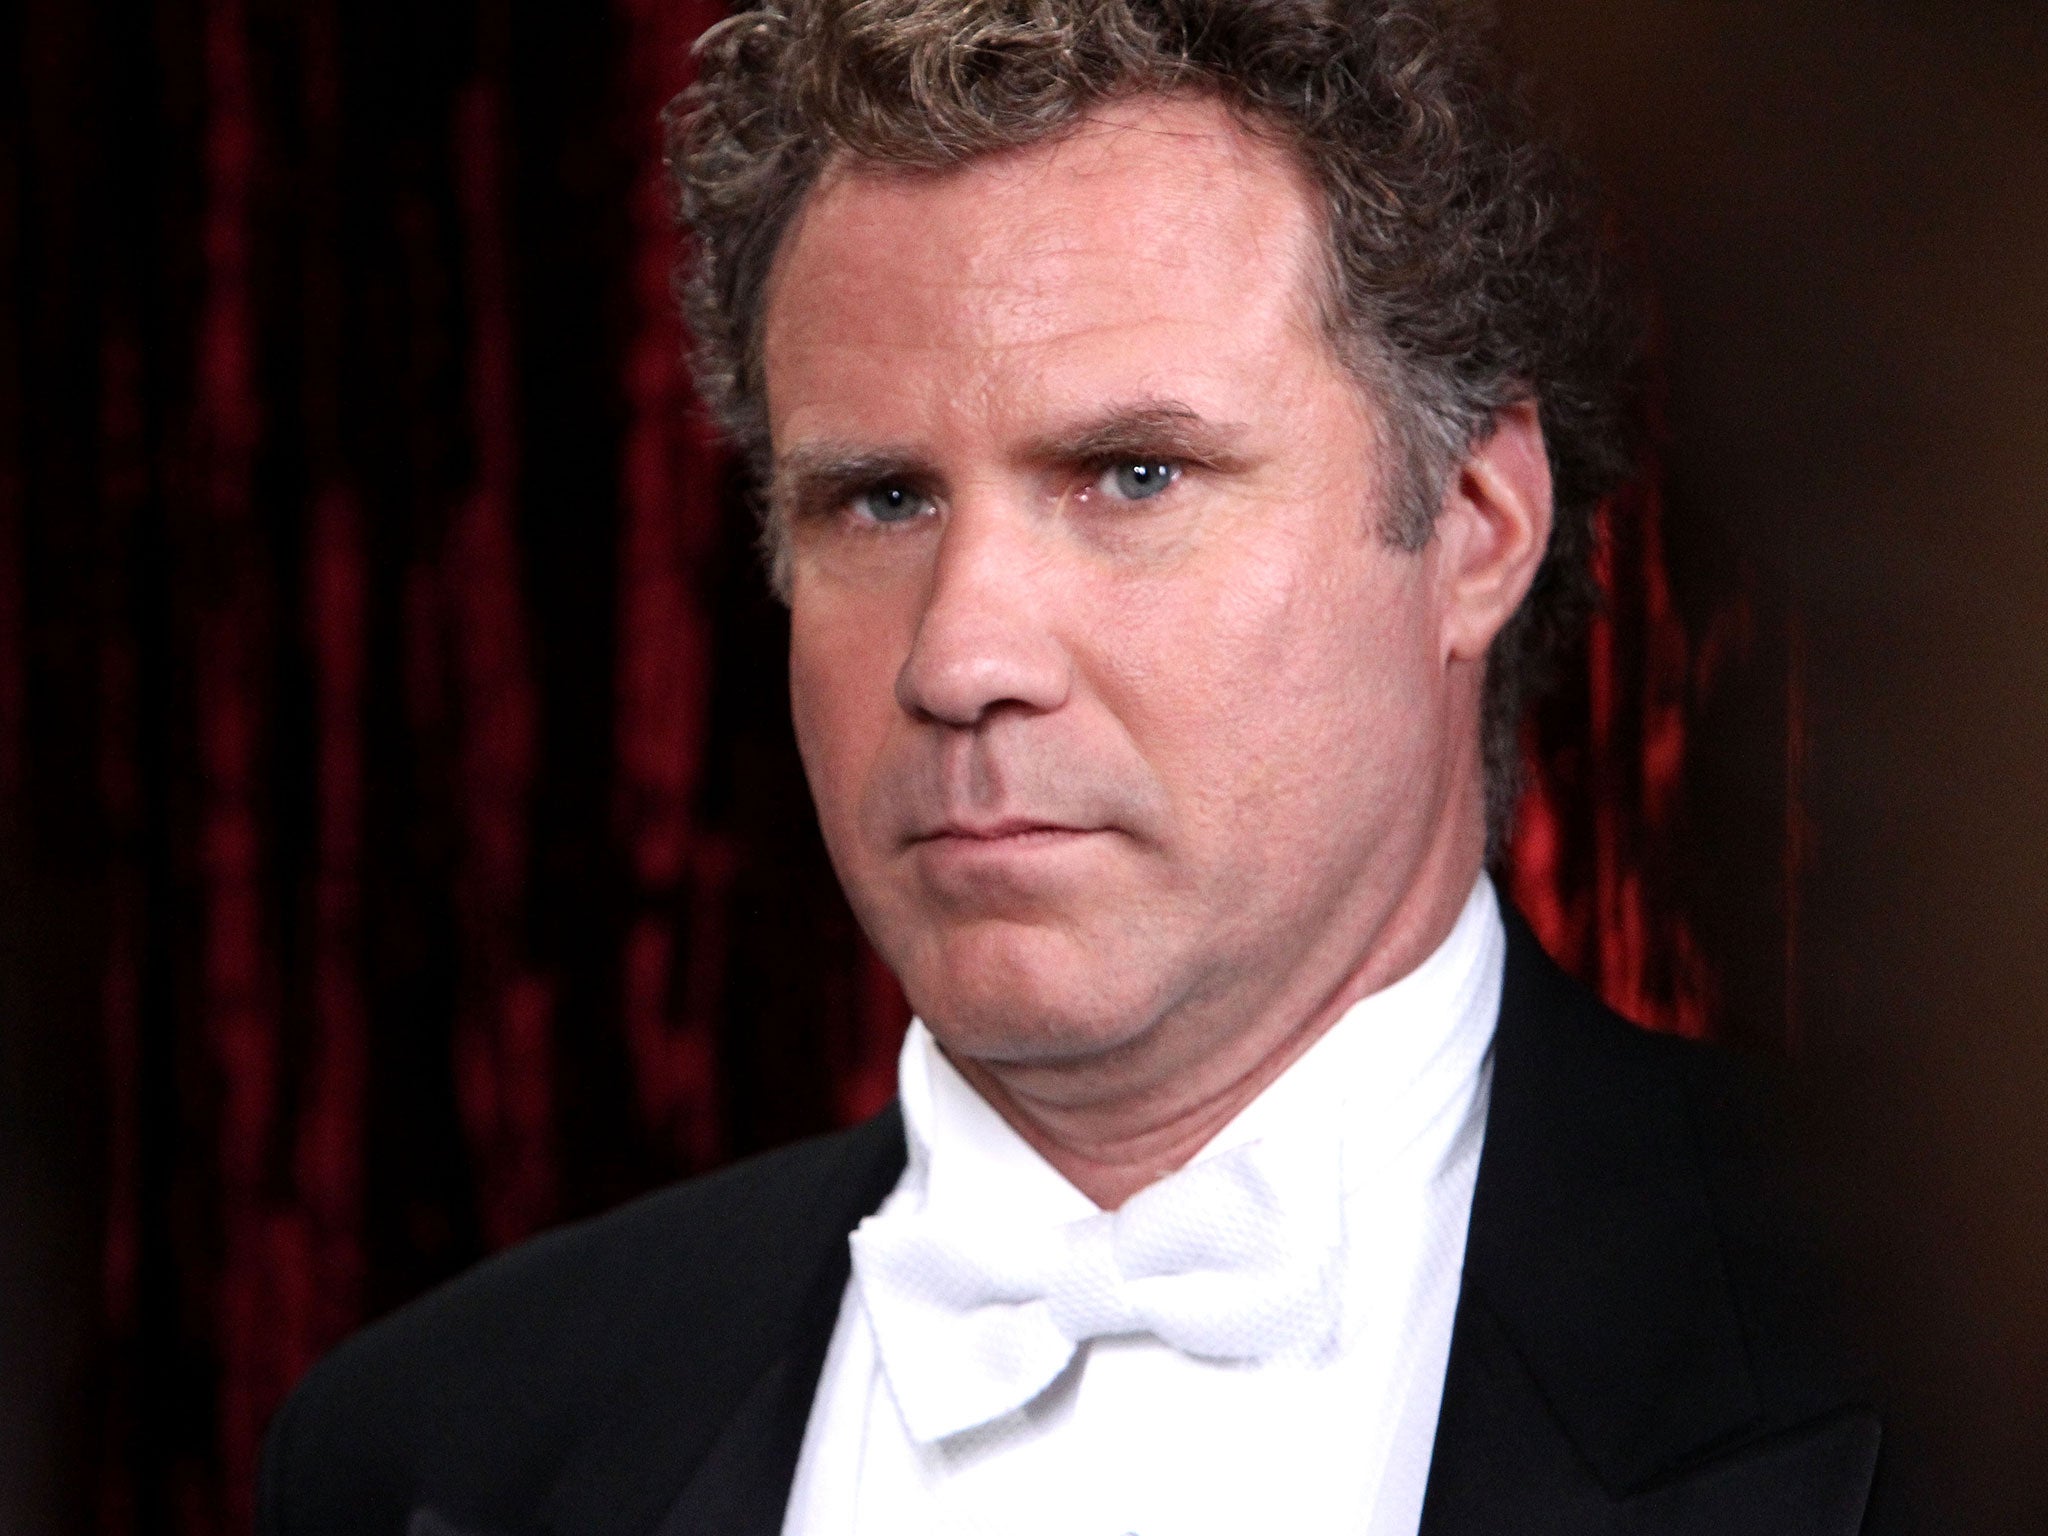 Will Ferrell is being urged to reconsider the project